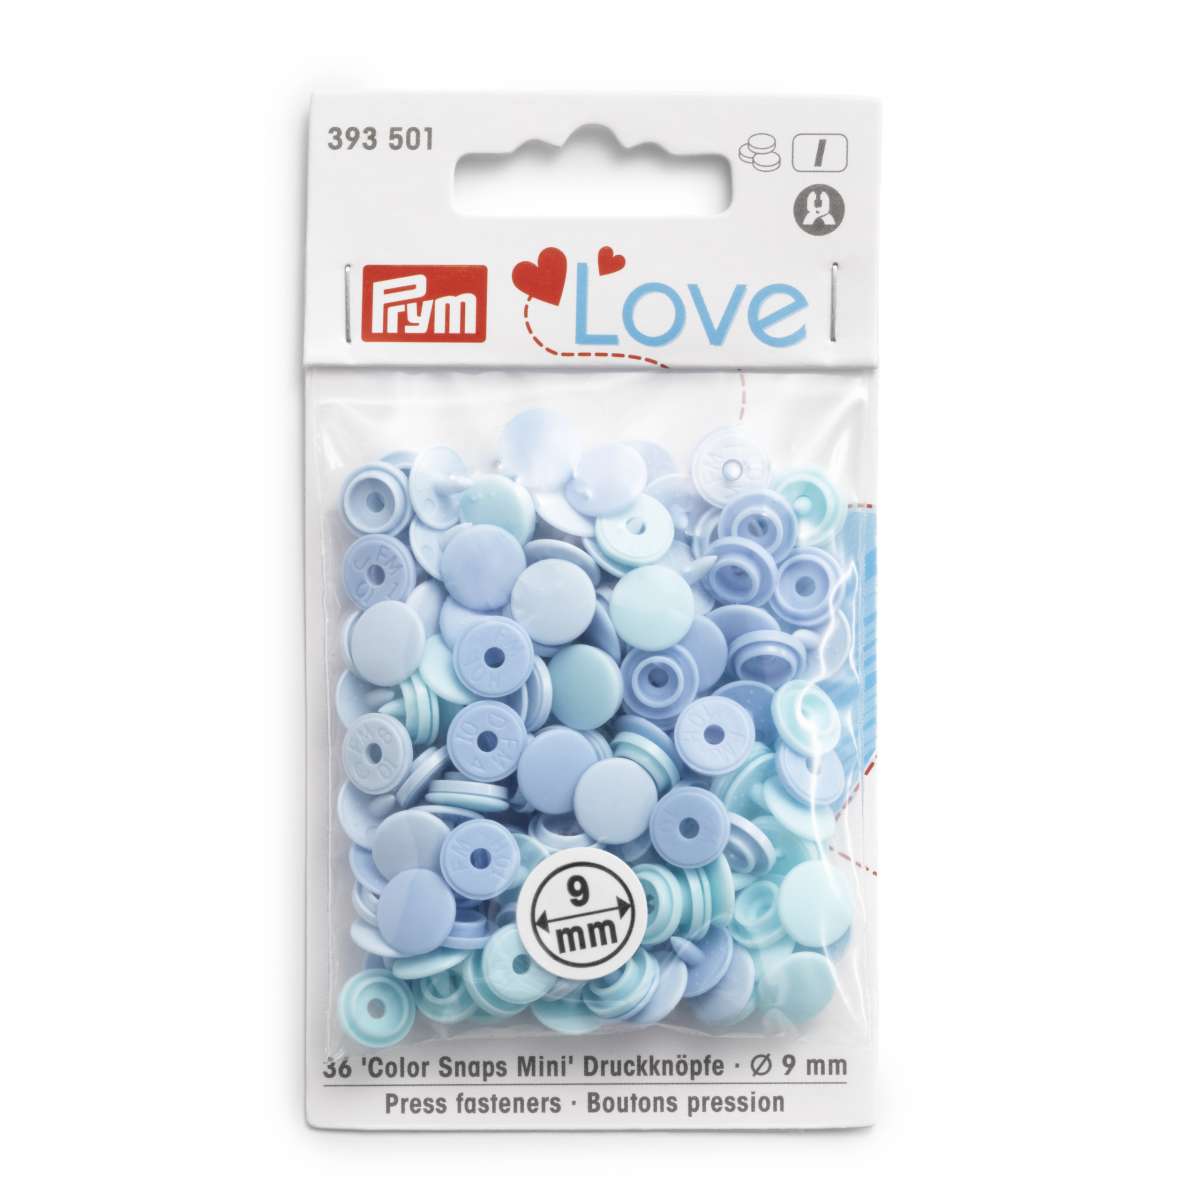 Prym Love Press fasteners Colour Snaps Mini, 9 mm, in shades of light blue